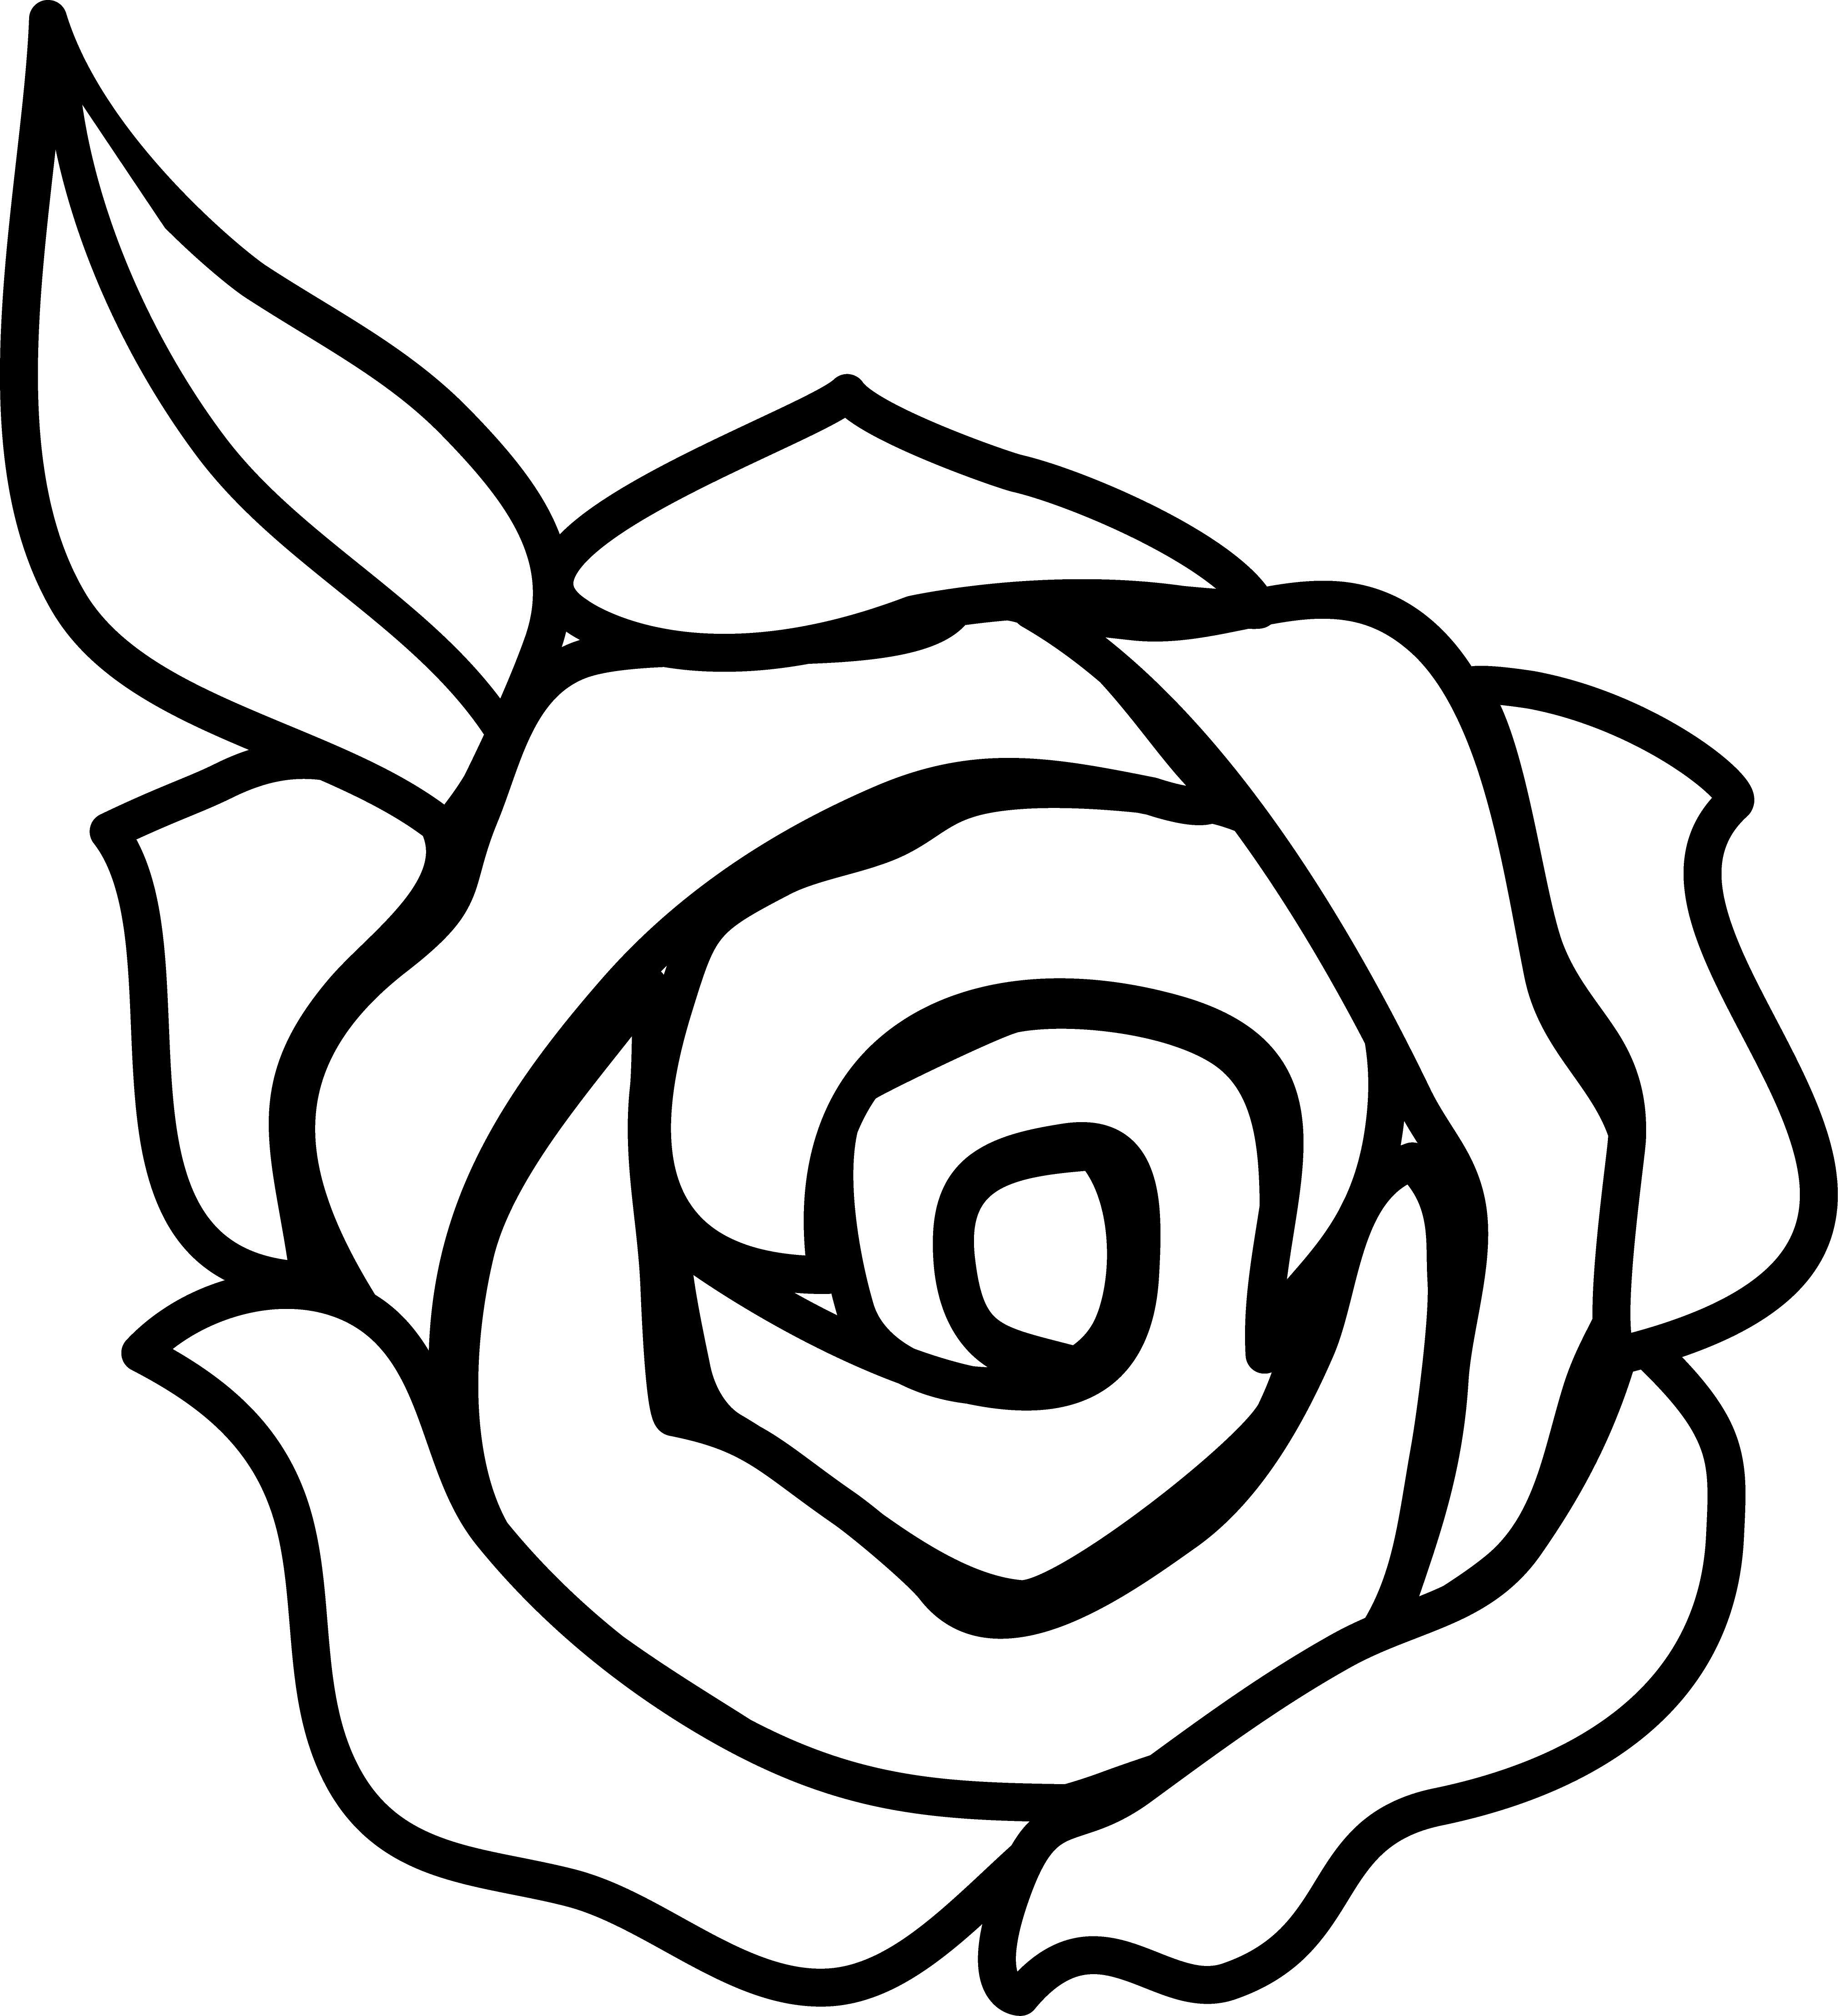 Black And White Rose Design - ClipArt Best - ClipArt Best